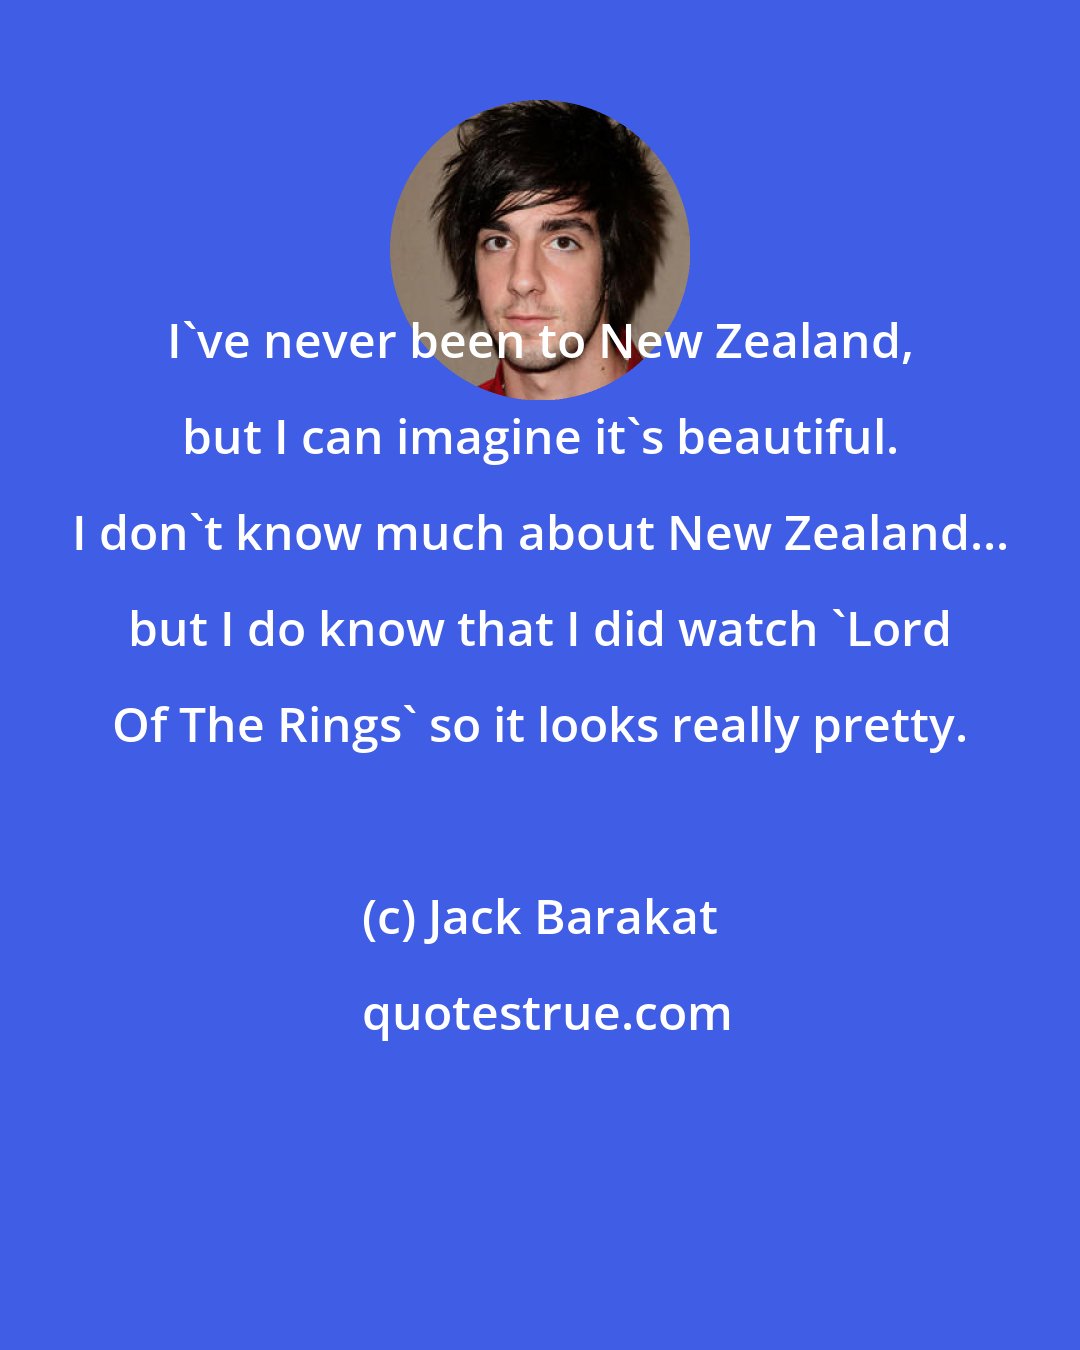 Jack Barakat: I've never been to New Zealand, but I can imagine it's beautiful. I don't know much about New Zealand... but I do know that I did watch 'Lord Of The Rings' so it looks really pretty.